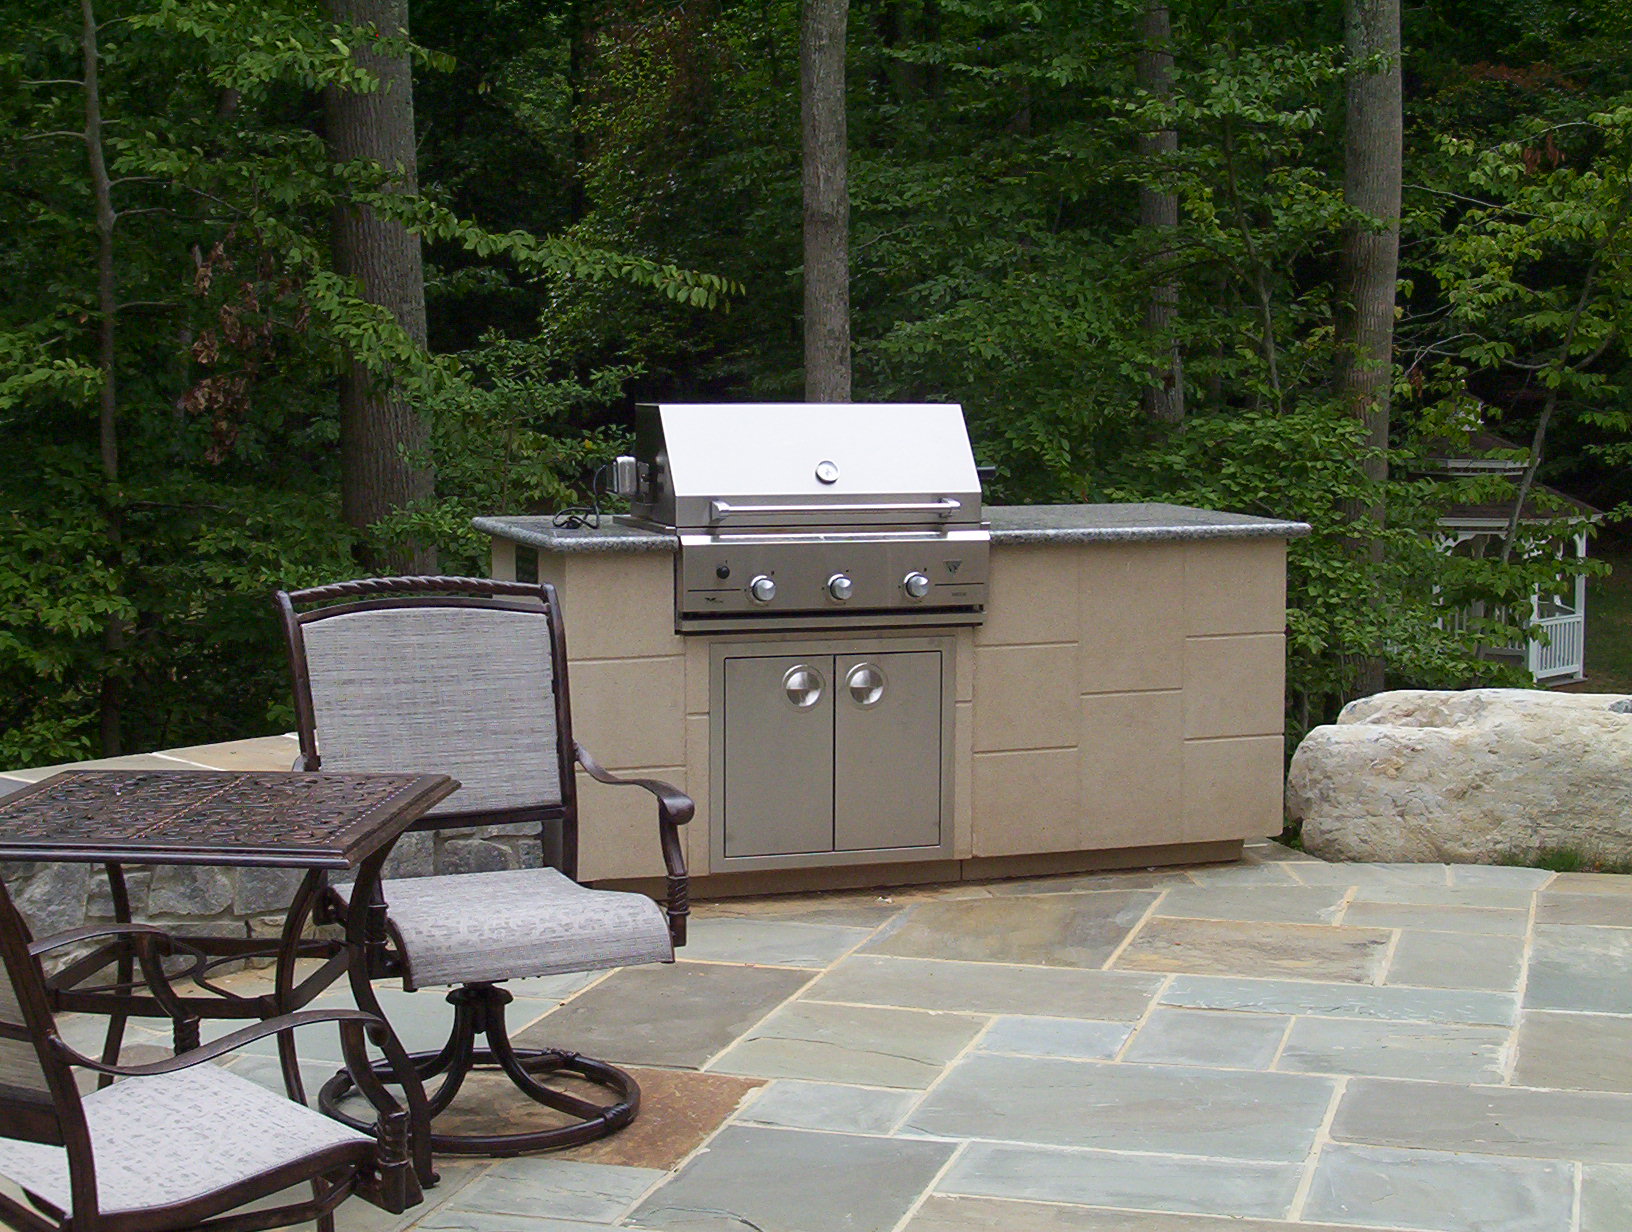 Patio installation with outdoor grill